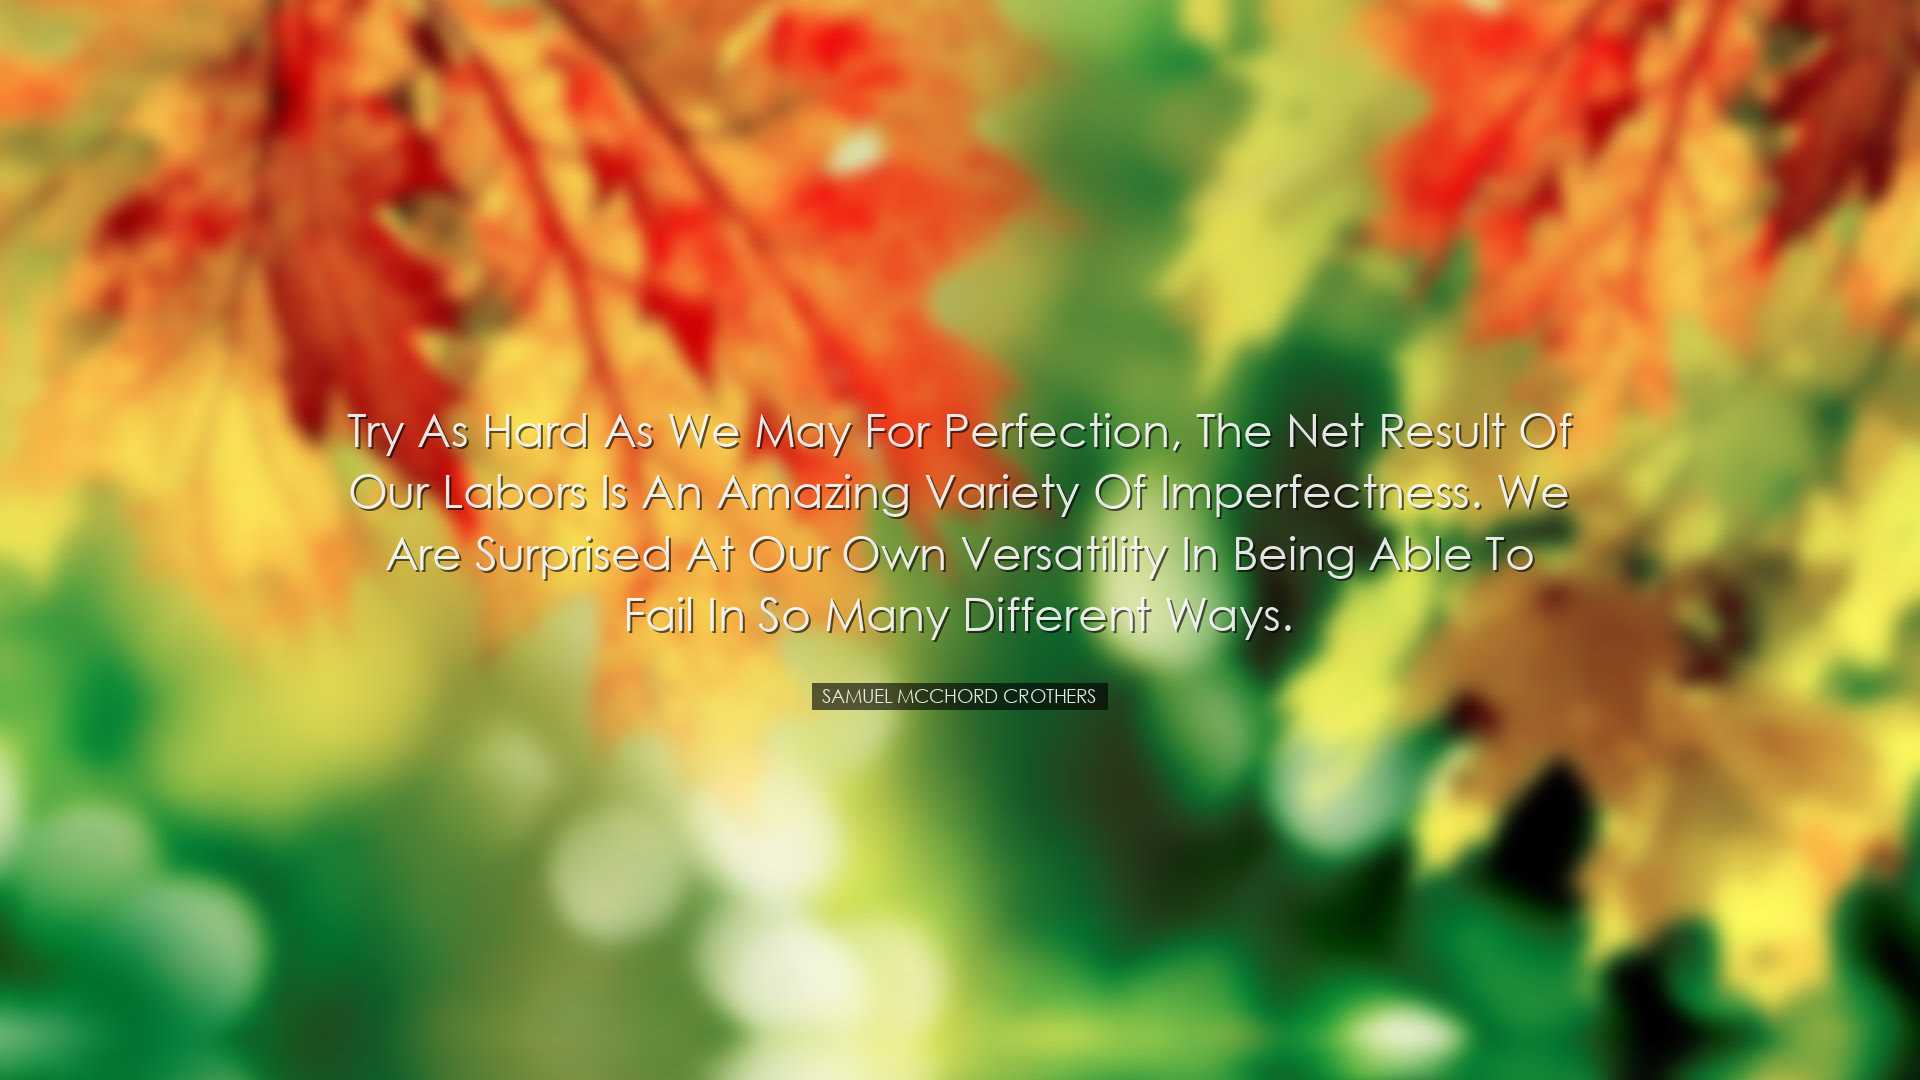 Try as hard as we may for perfection, the net result of our labors